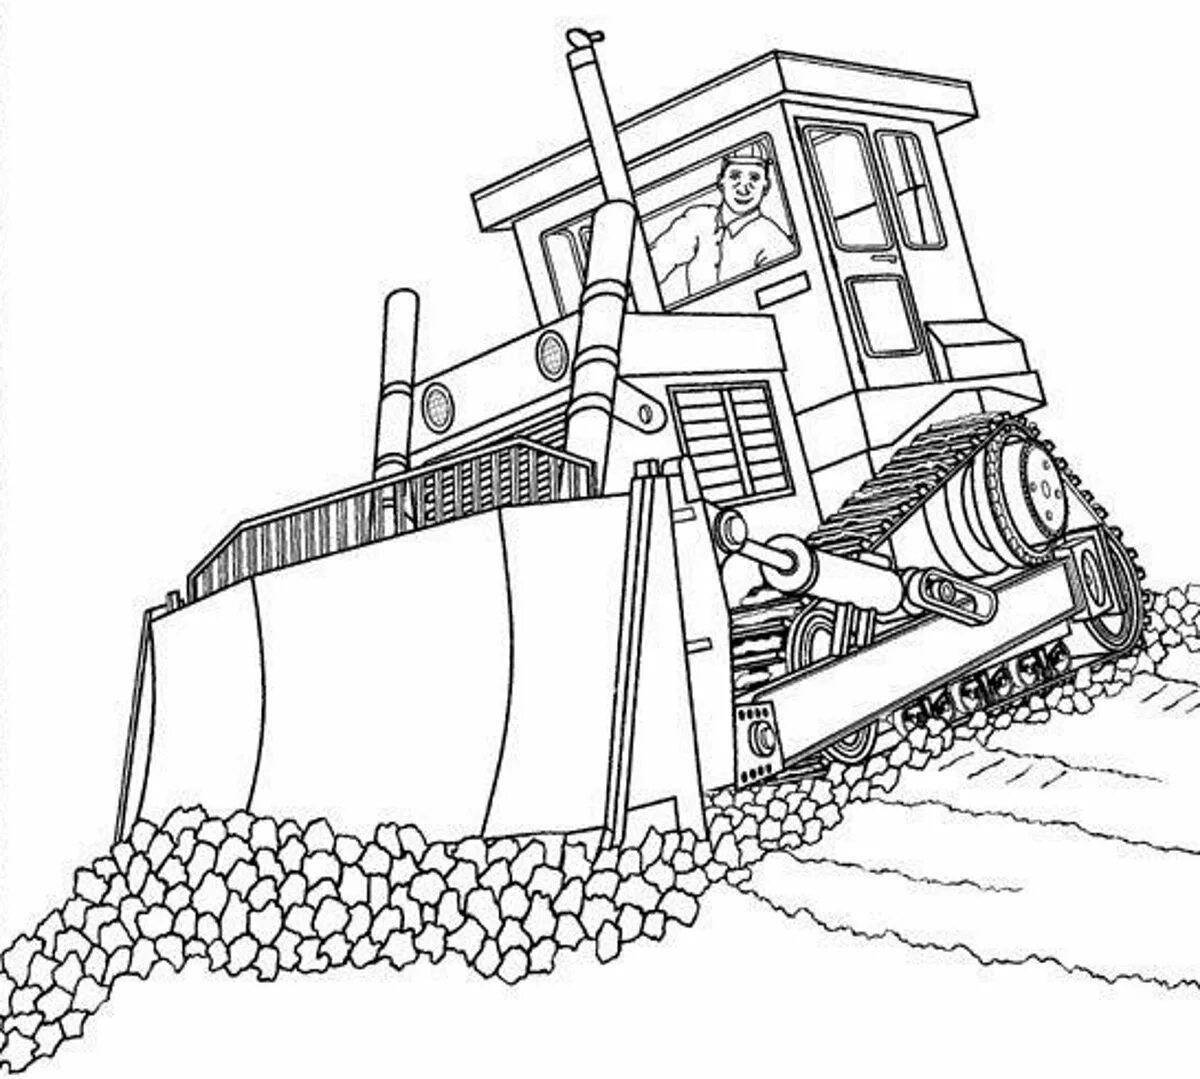 A cheerful bulldozer coloring book for children 3-4 years old